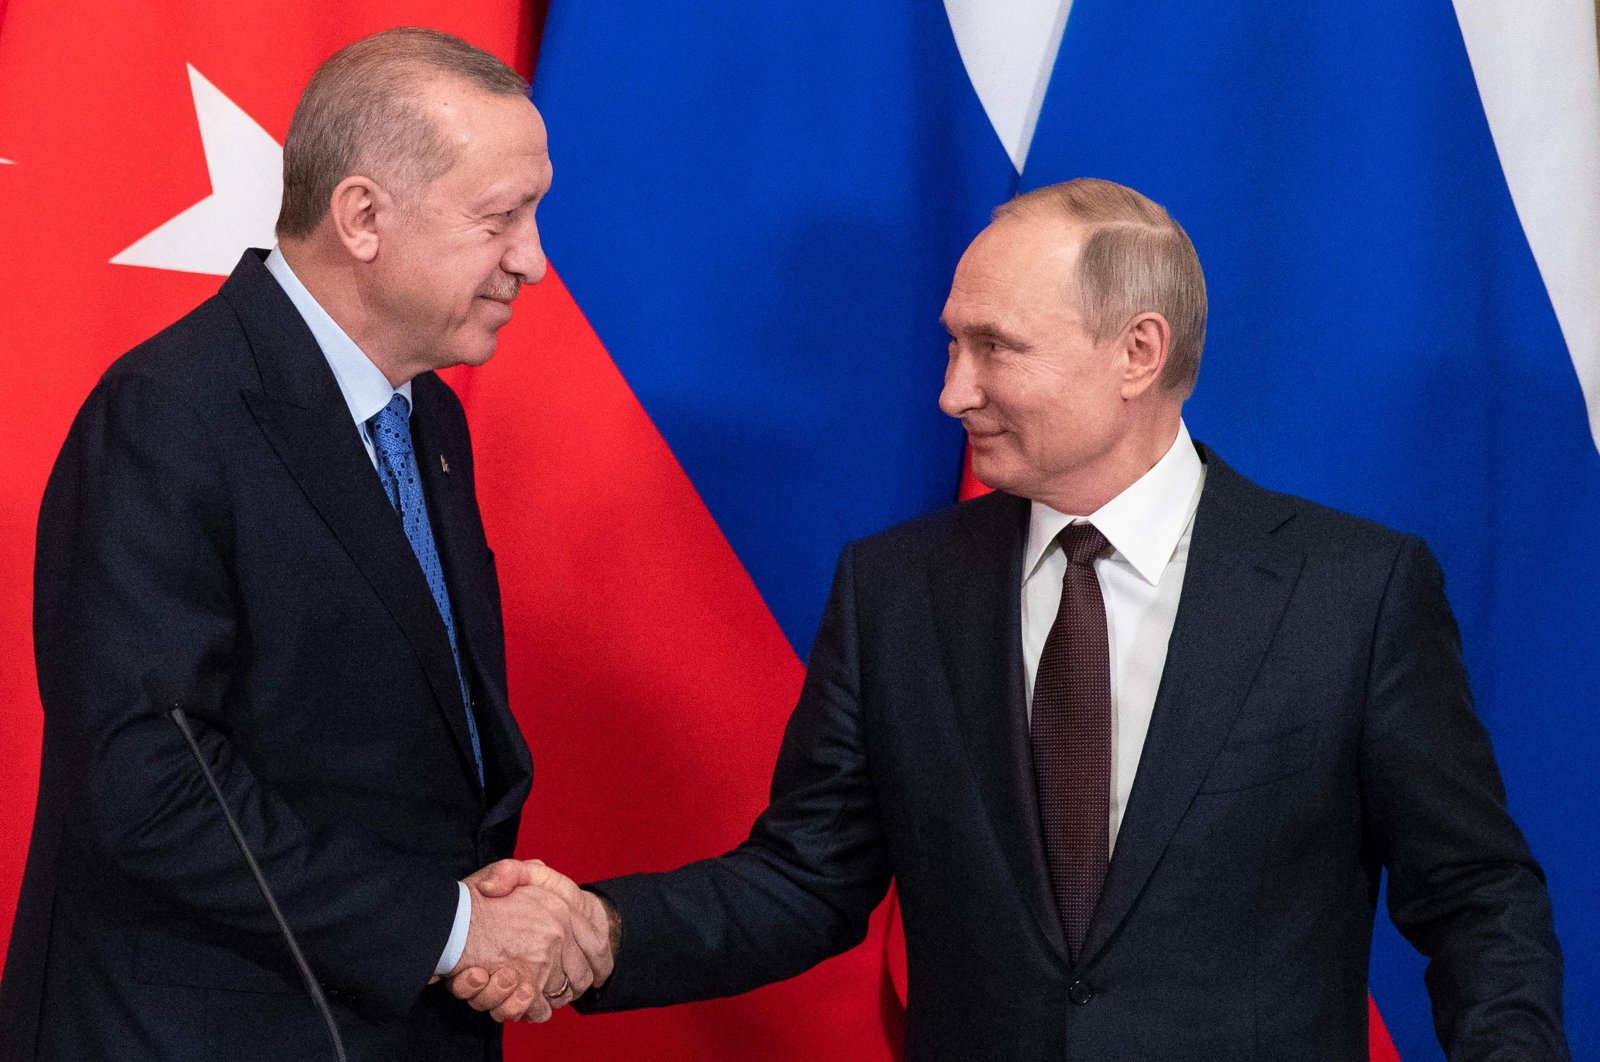 Russian President Vladimir Putin and his Turkish counterpart Recep Tayyip Erdoğan shake hands at the end of a joint press statement following their talks at the Kremlin in Moscow, March 5, 2020. (AFP File Photo)